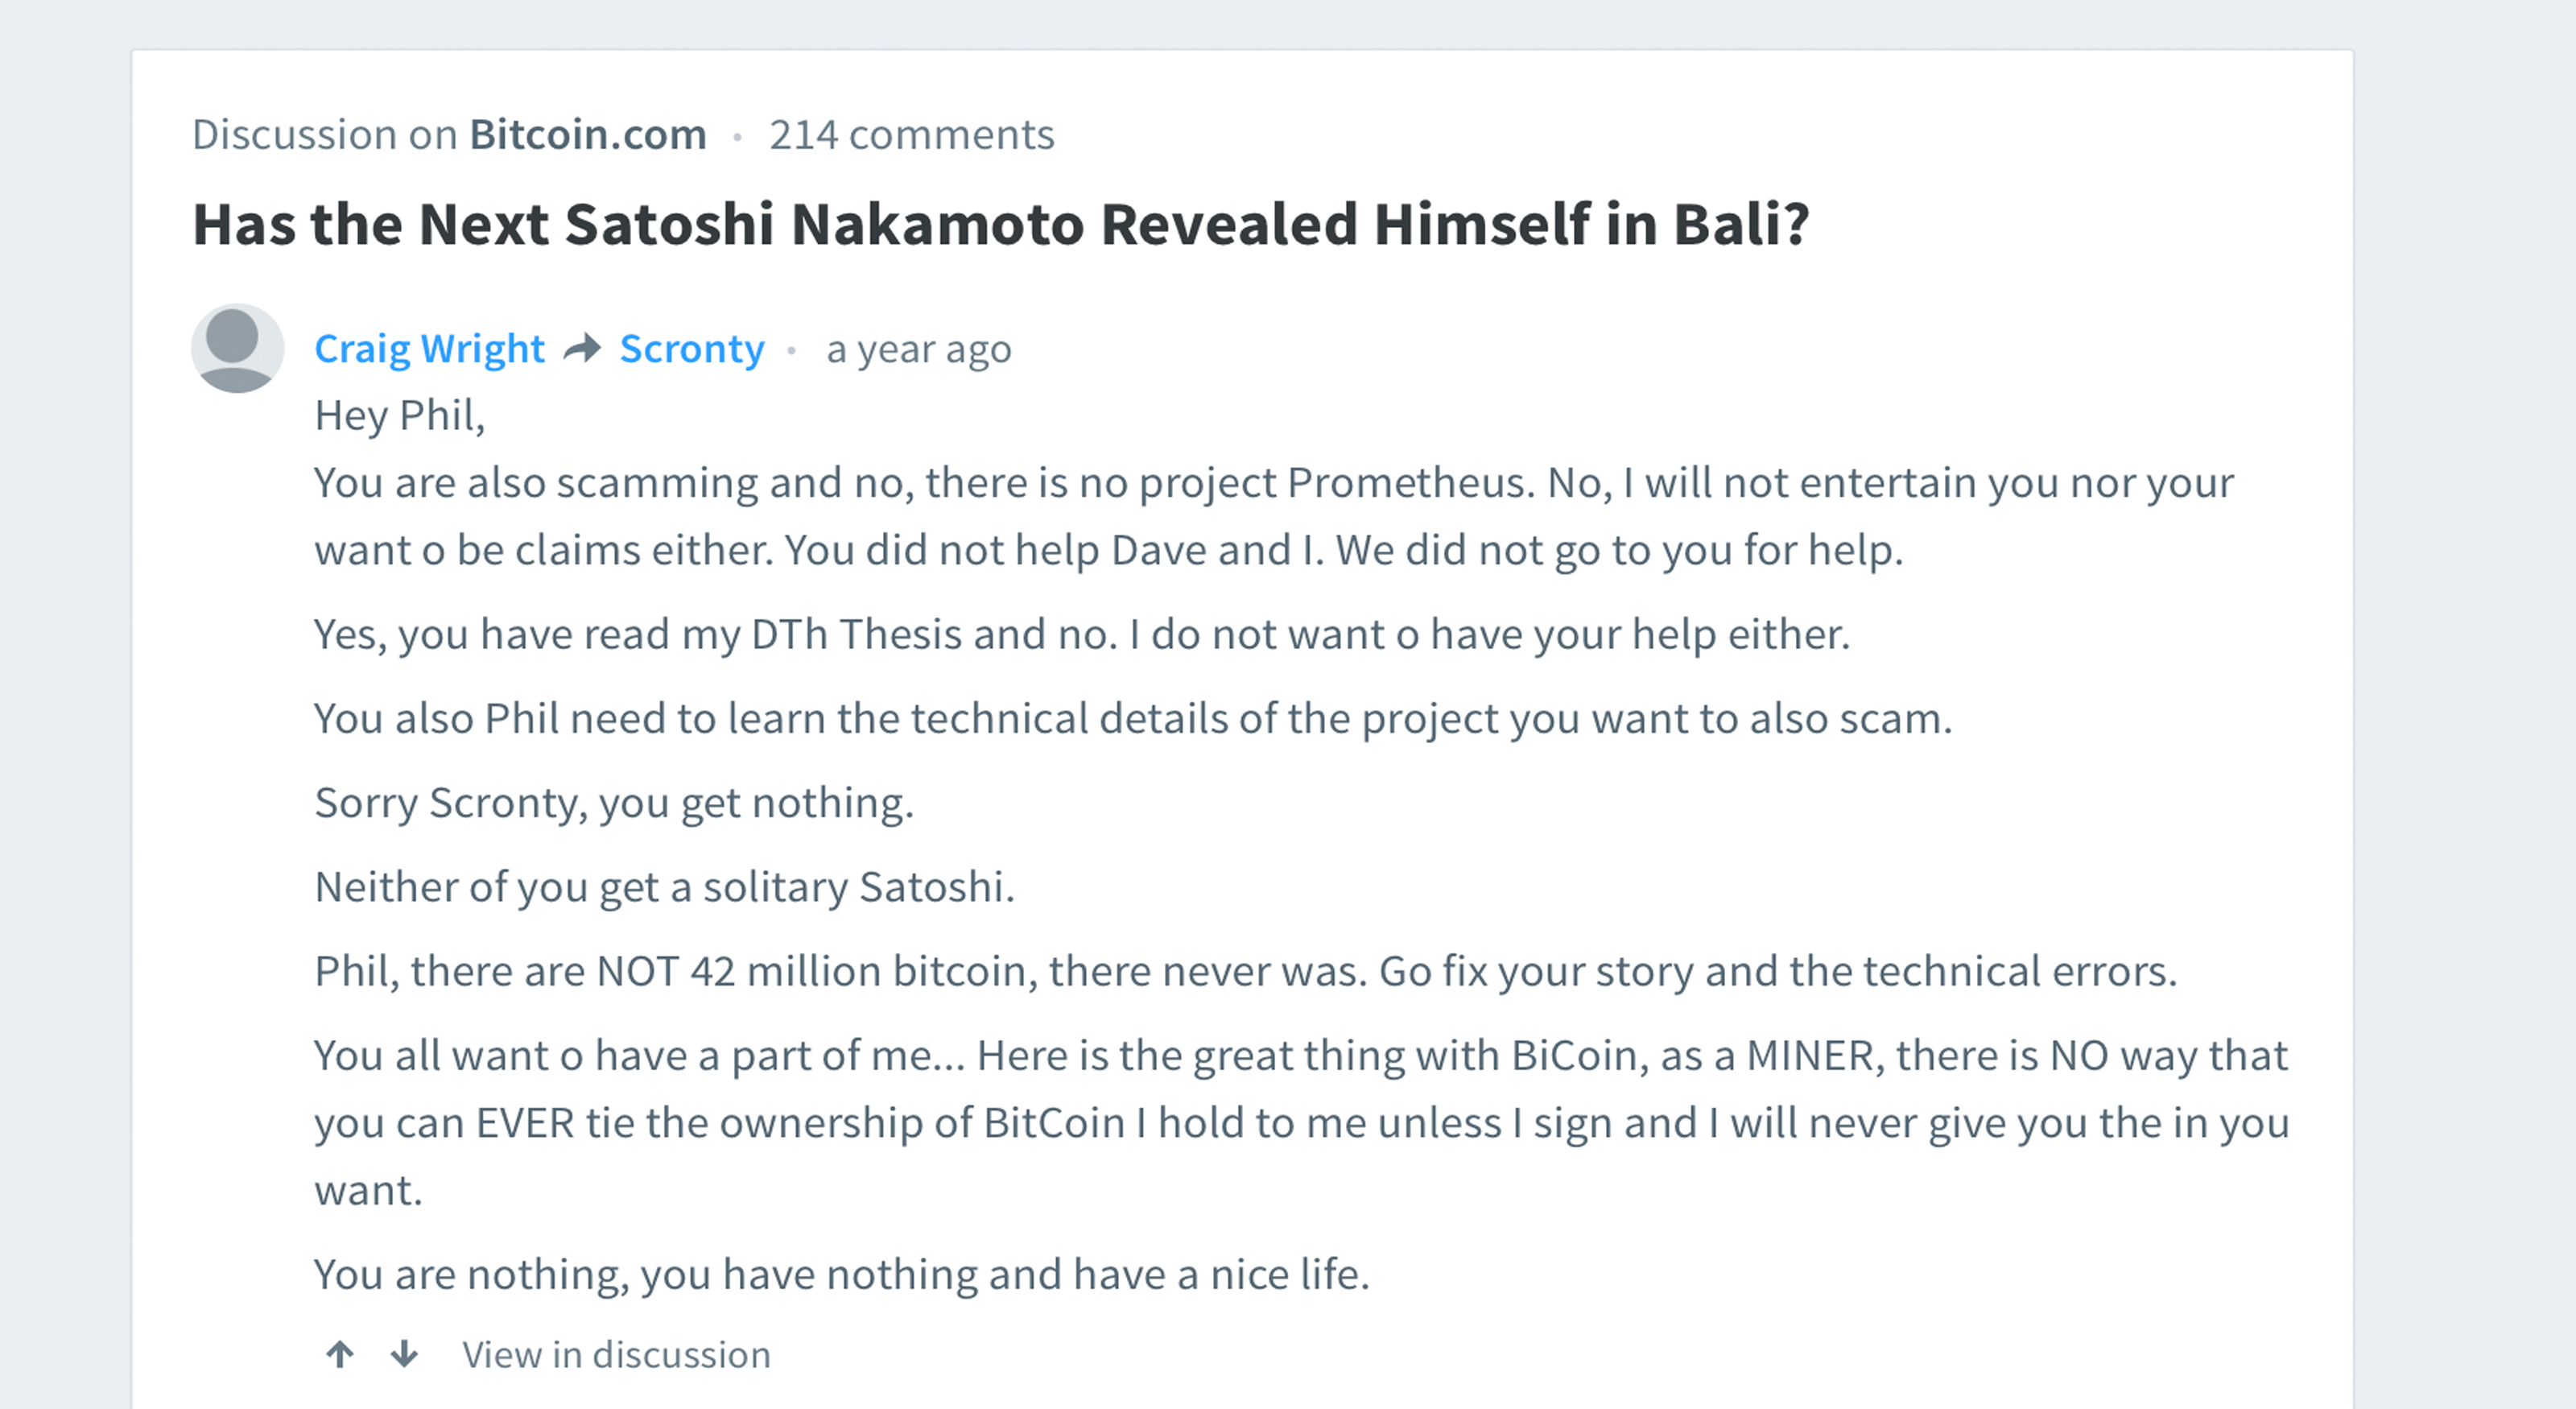   The new Satoshi Challenger tells everyone - Is He Legit? 